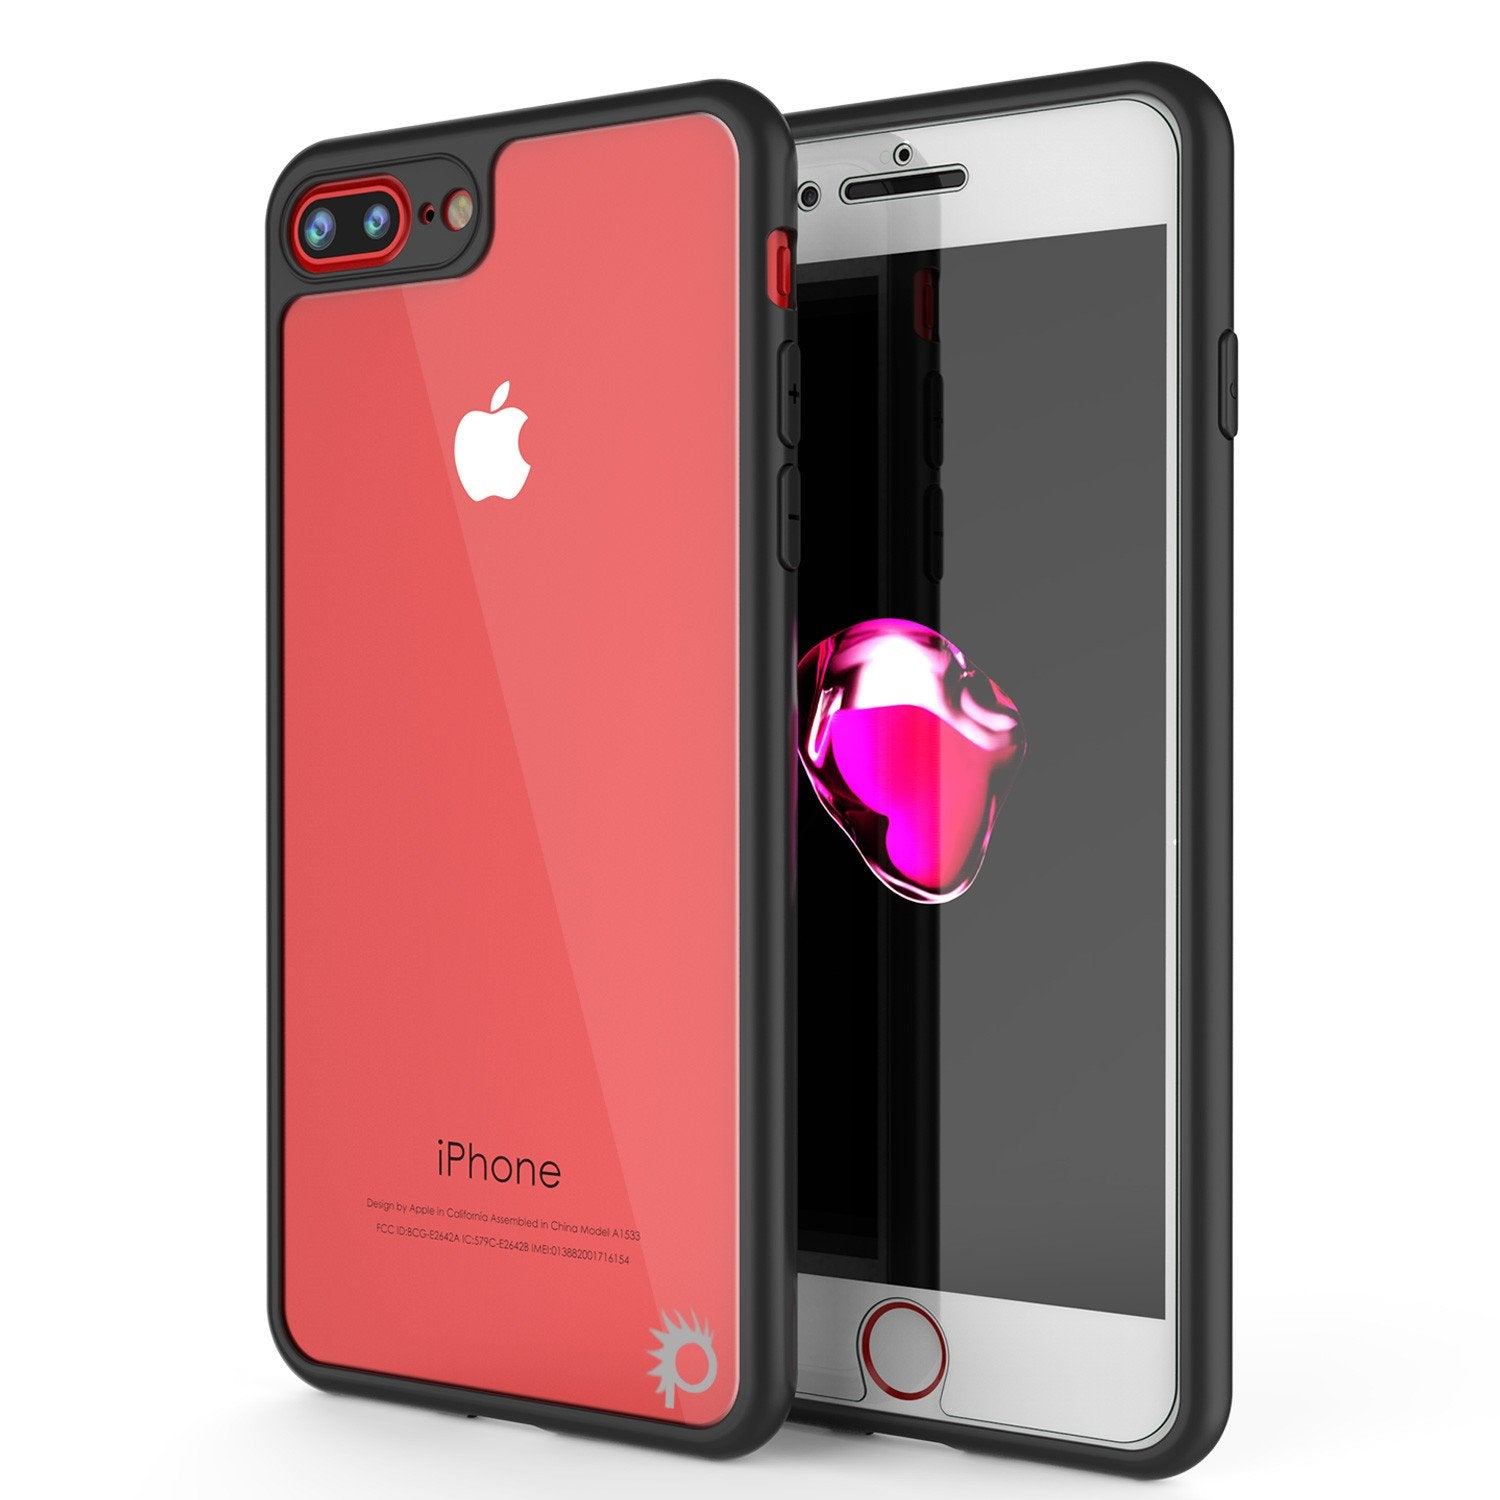 iPhone 7+ Plus Case, Punkcase [MASK Series] [BLACK] Full Body Hybrid Dual Layer TPU Cover W/ protective Tempered Glass Screen Protector - PunkCase NZ